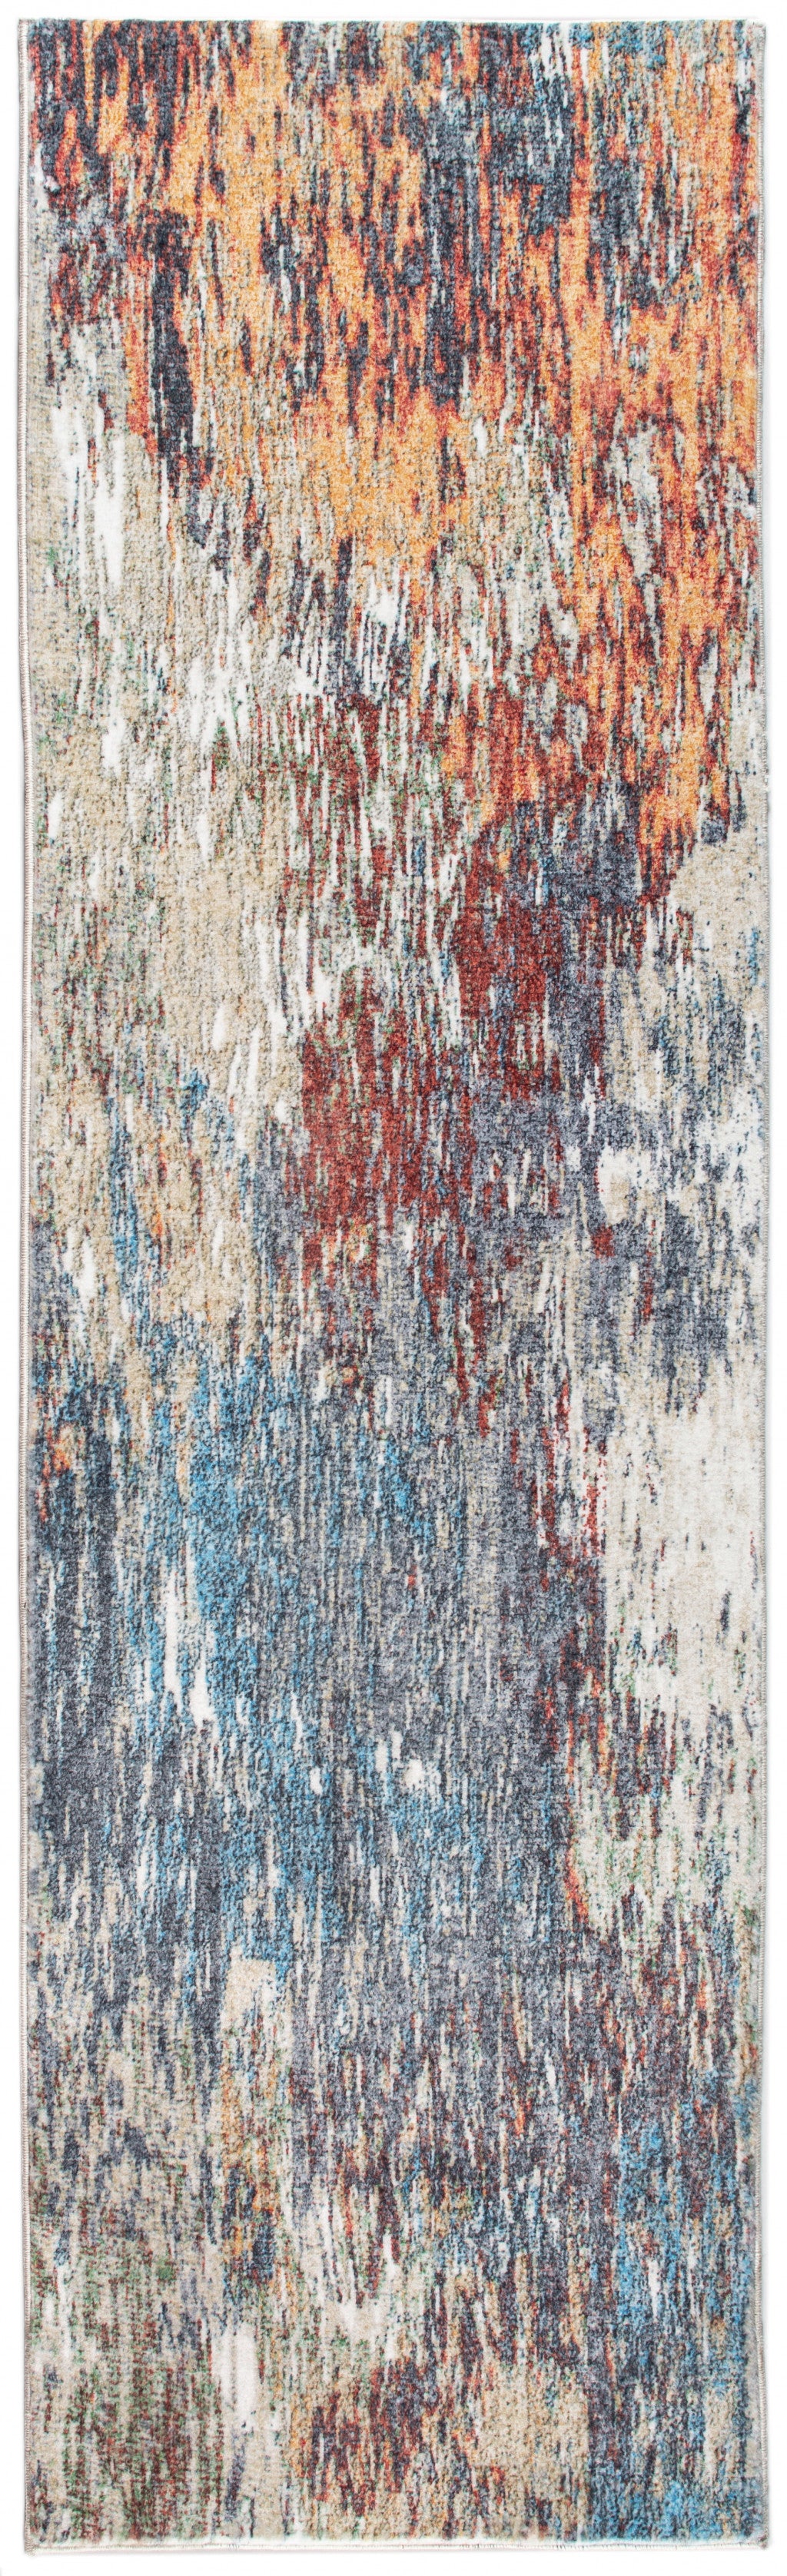 8’ x 10’ Blue Red Abstract Painting Modern Area Rug